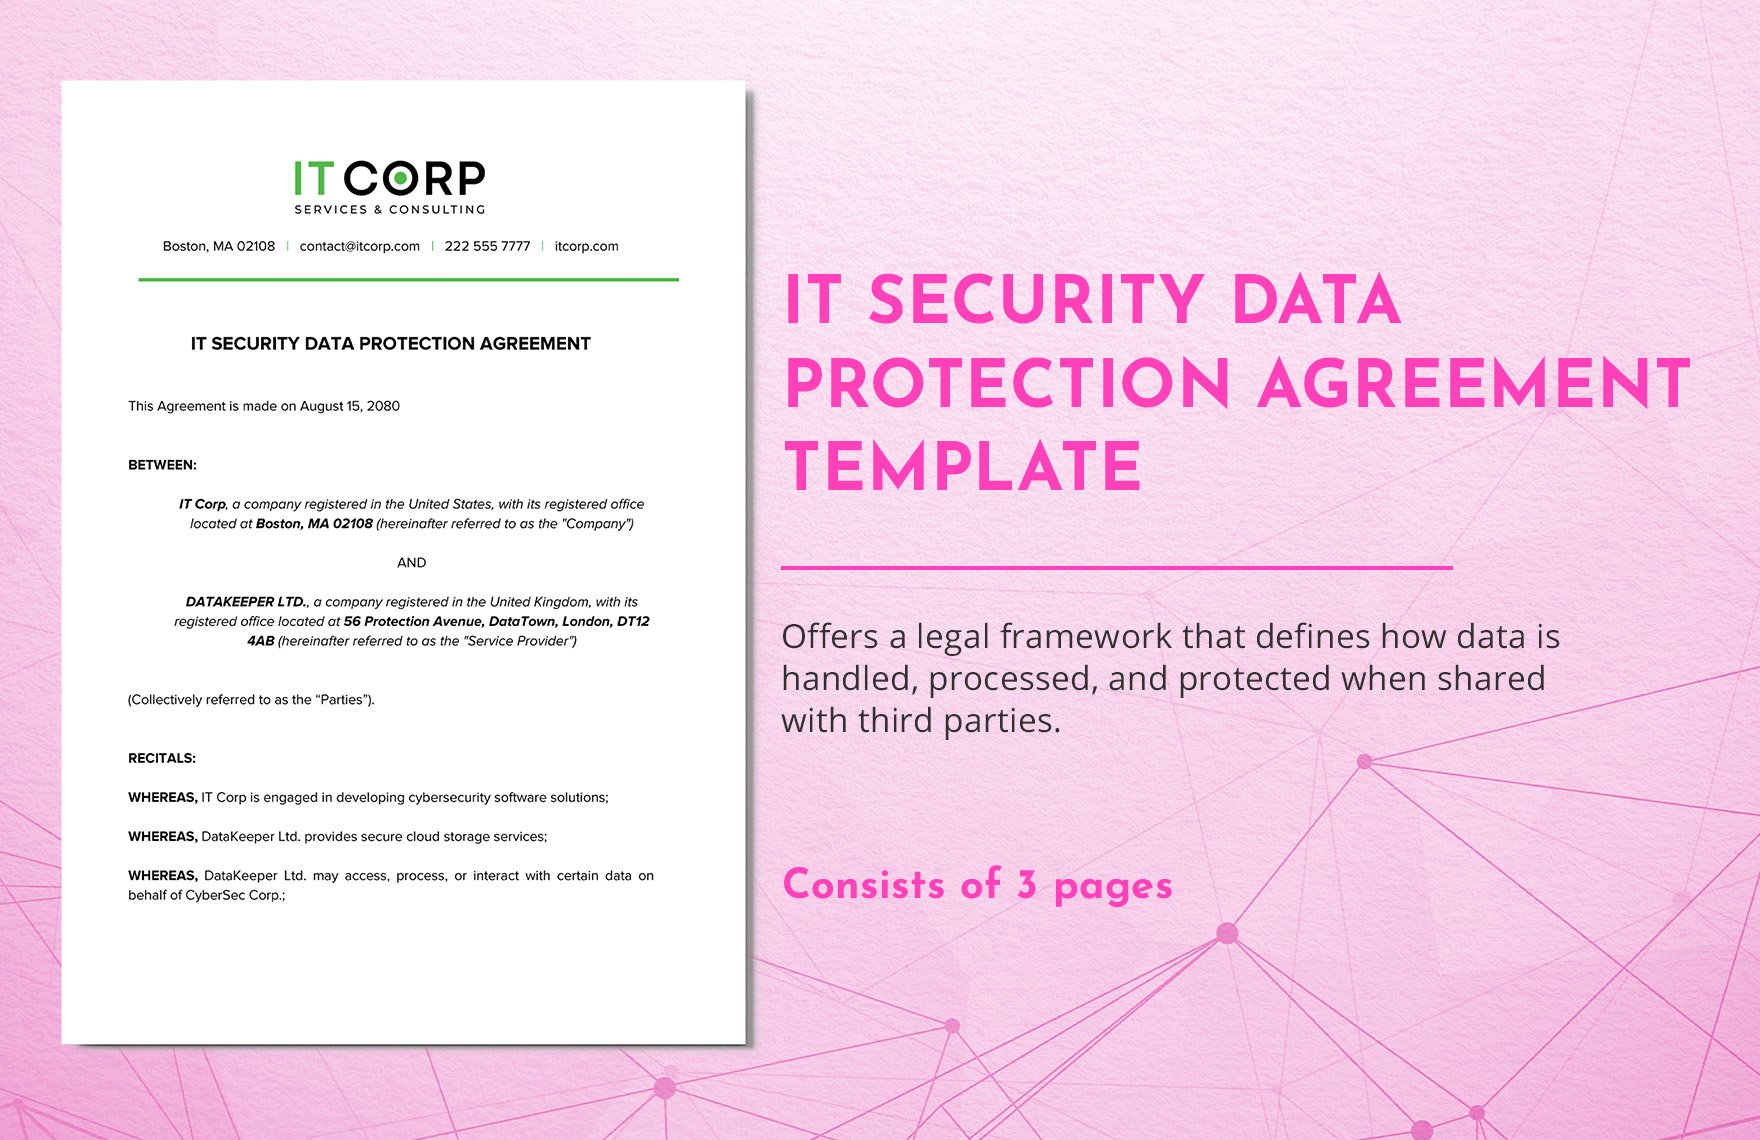 IT Security Data Protection Agreement Template in Word, Google Docs, PDF